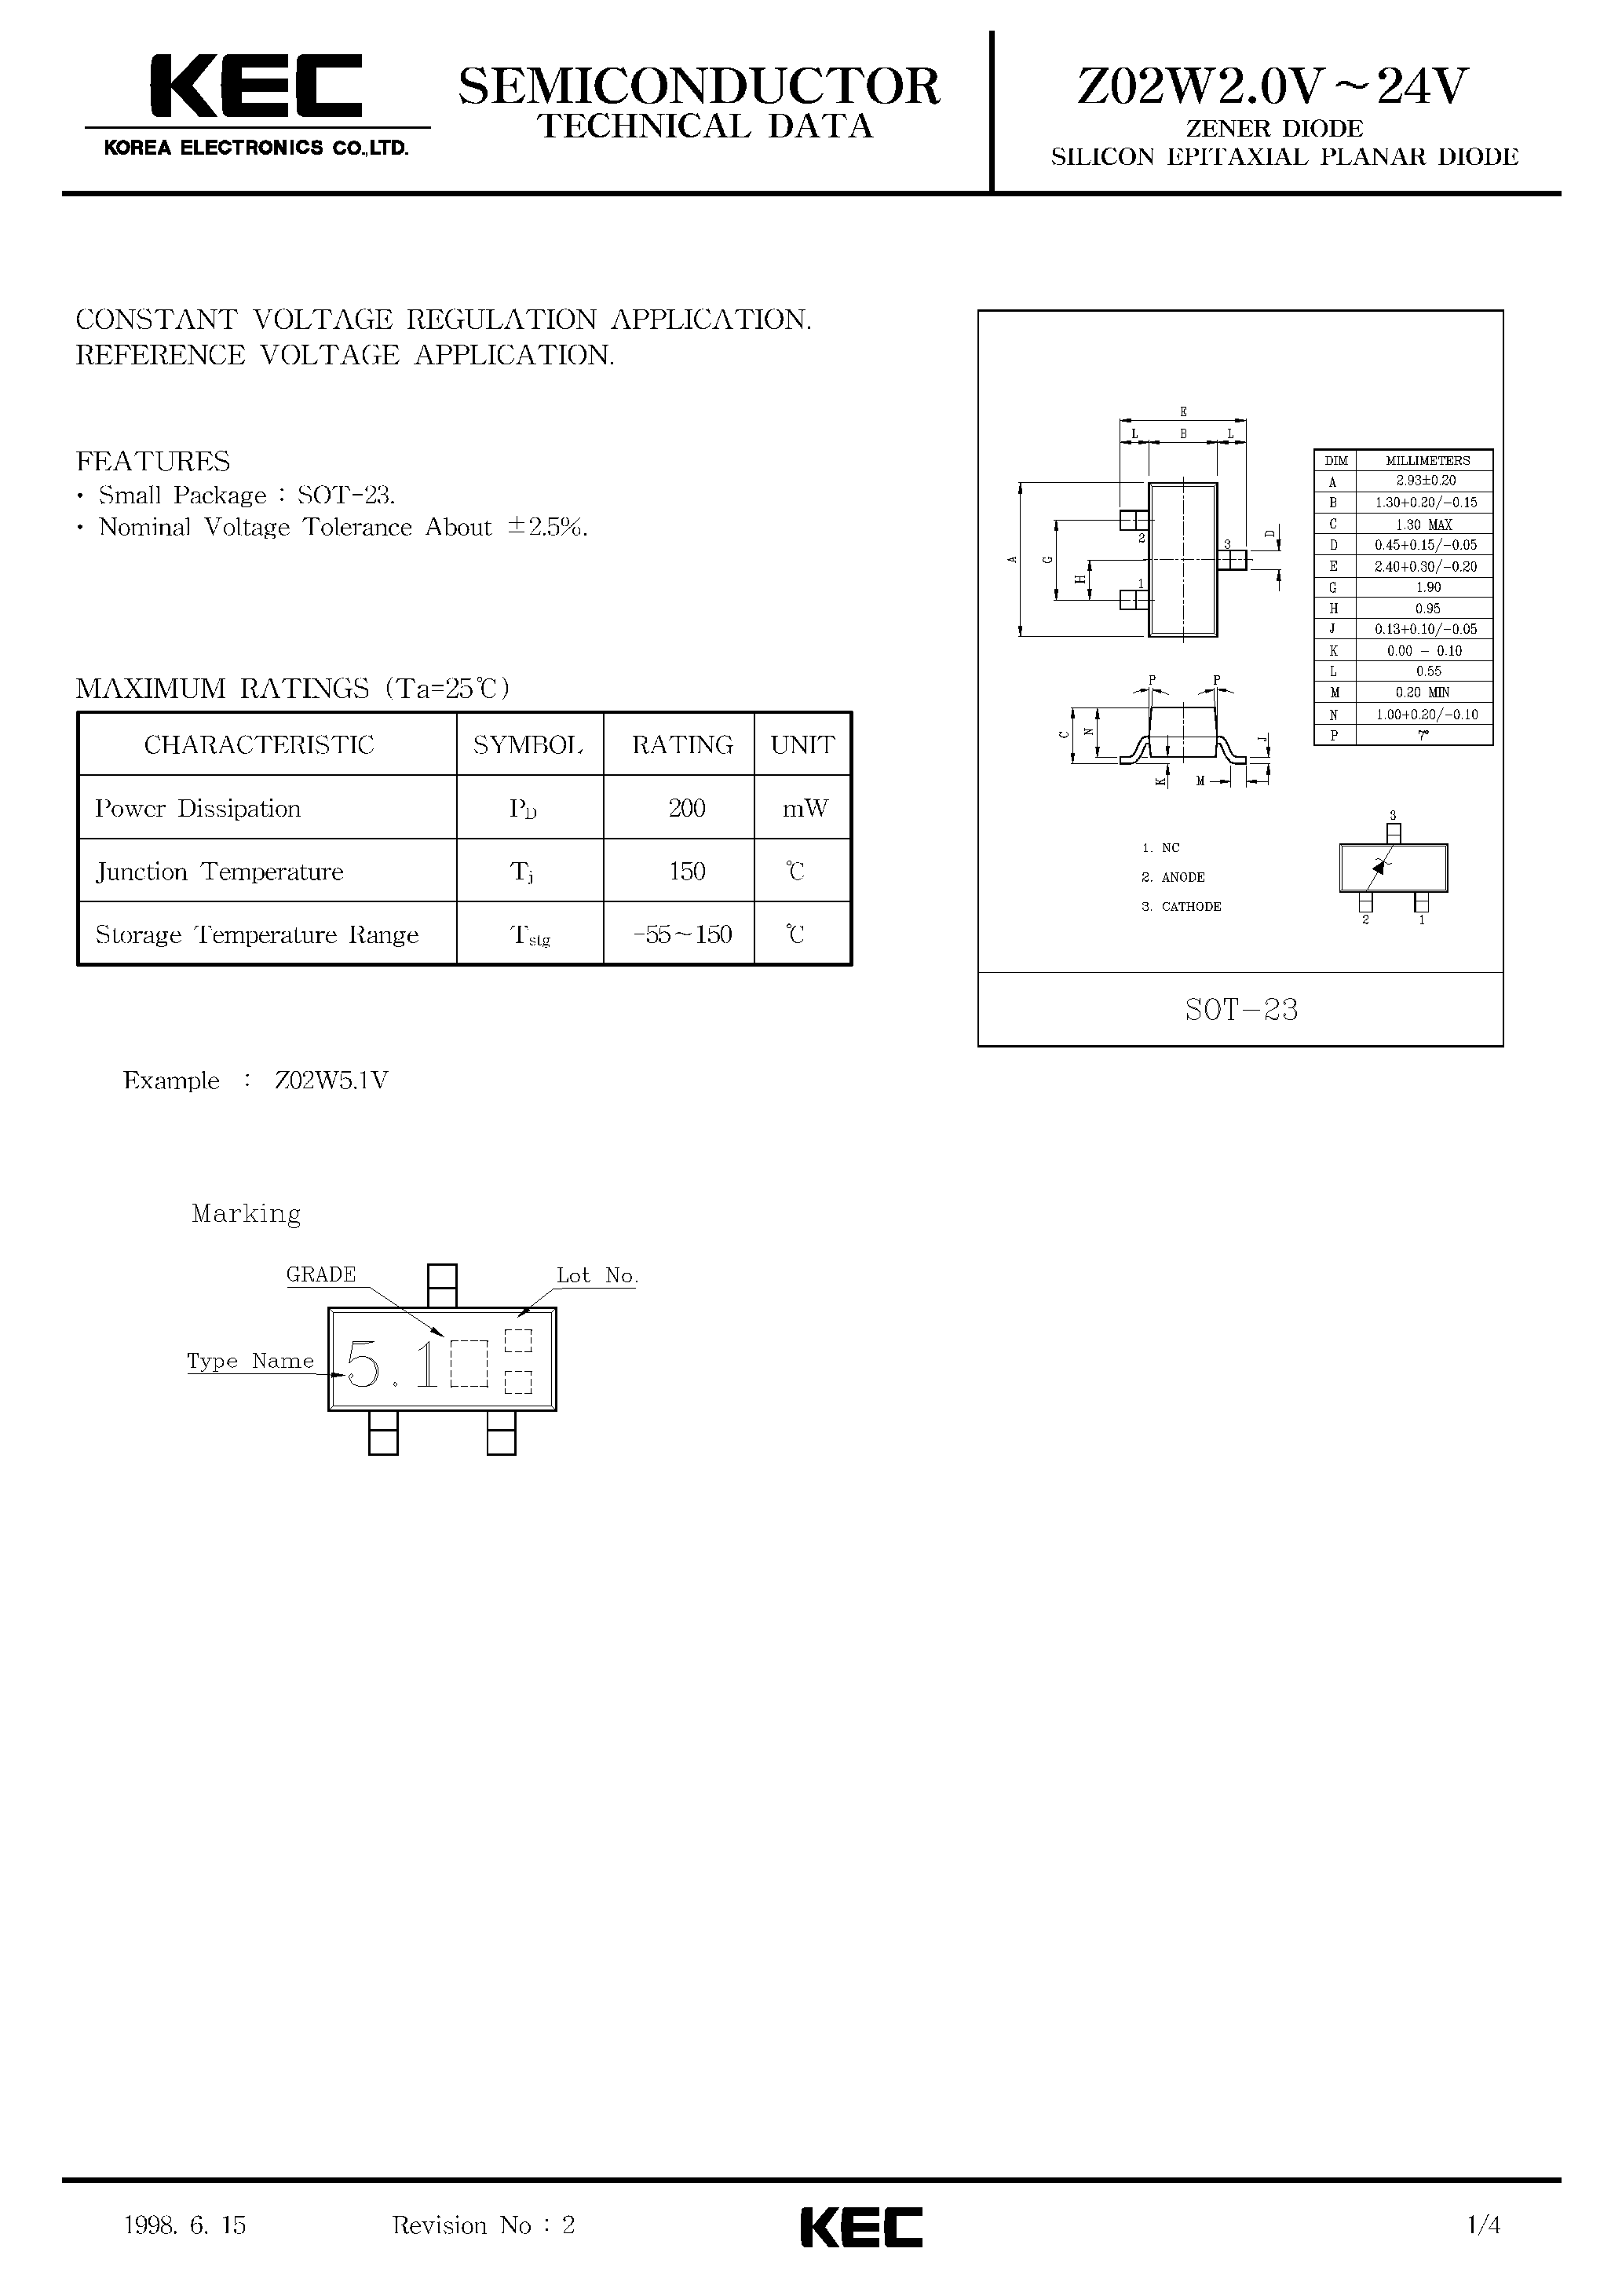 Datasheet Z02W6.2V - ZENER DIODE SILICON EPITAXIAL PLANAR DIODE page 1